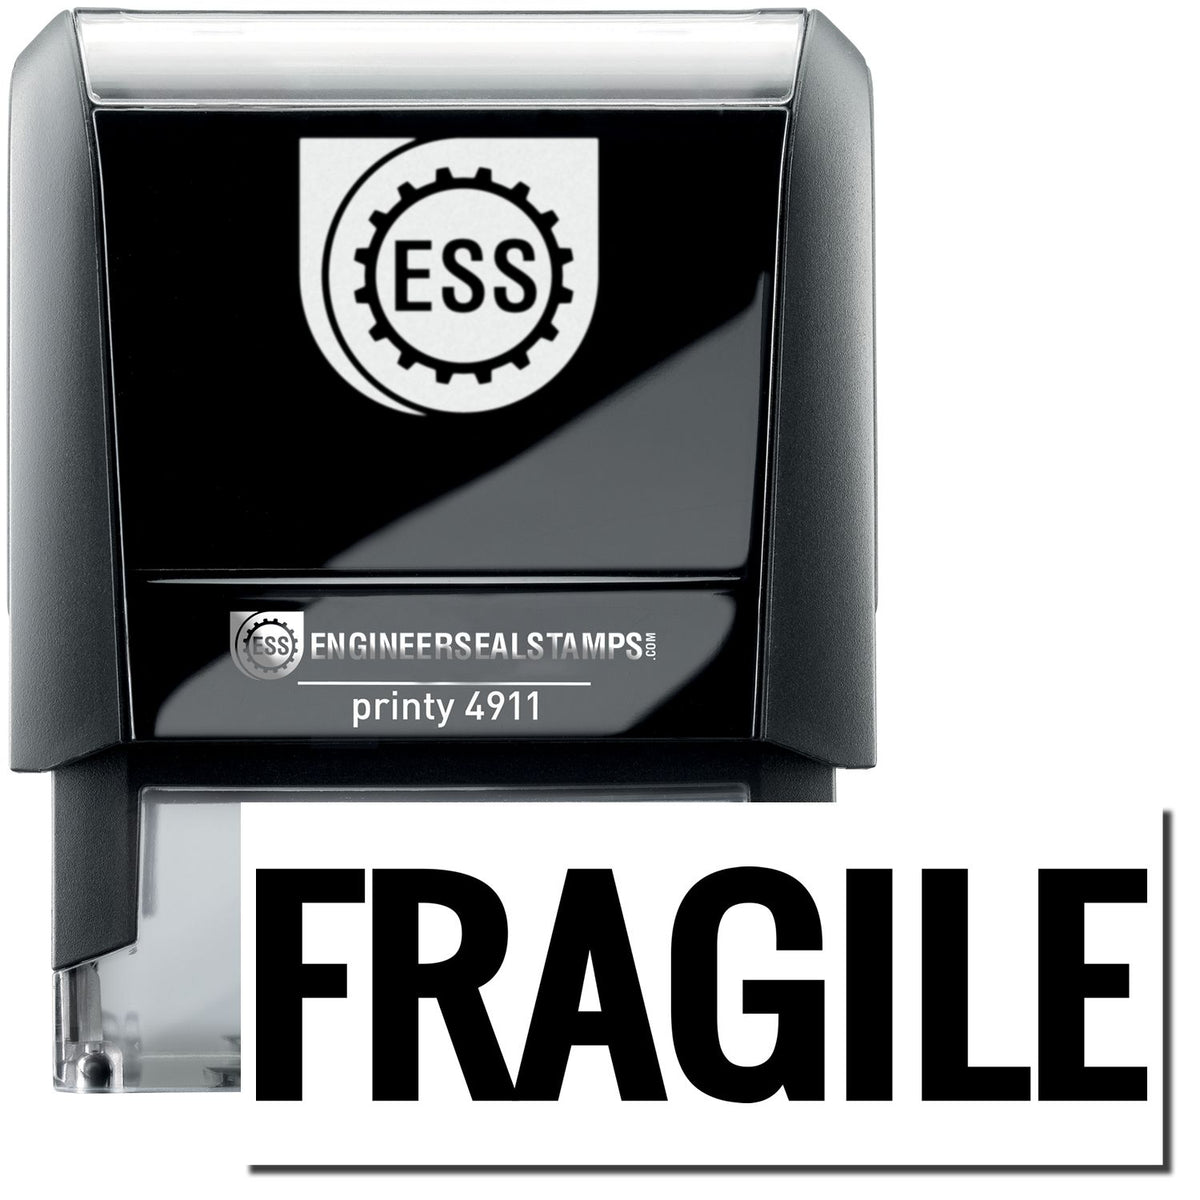 A self-inking stamp with a stamped image showing how the text &quot;FRAGILE&quot; in bold font is displayed after stamping.